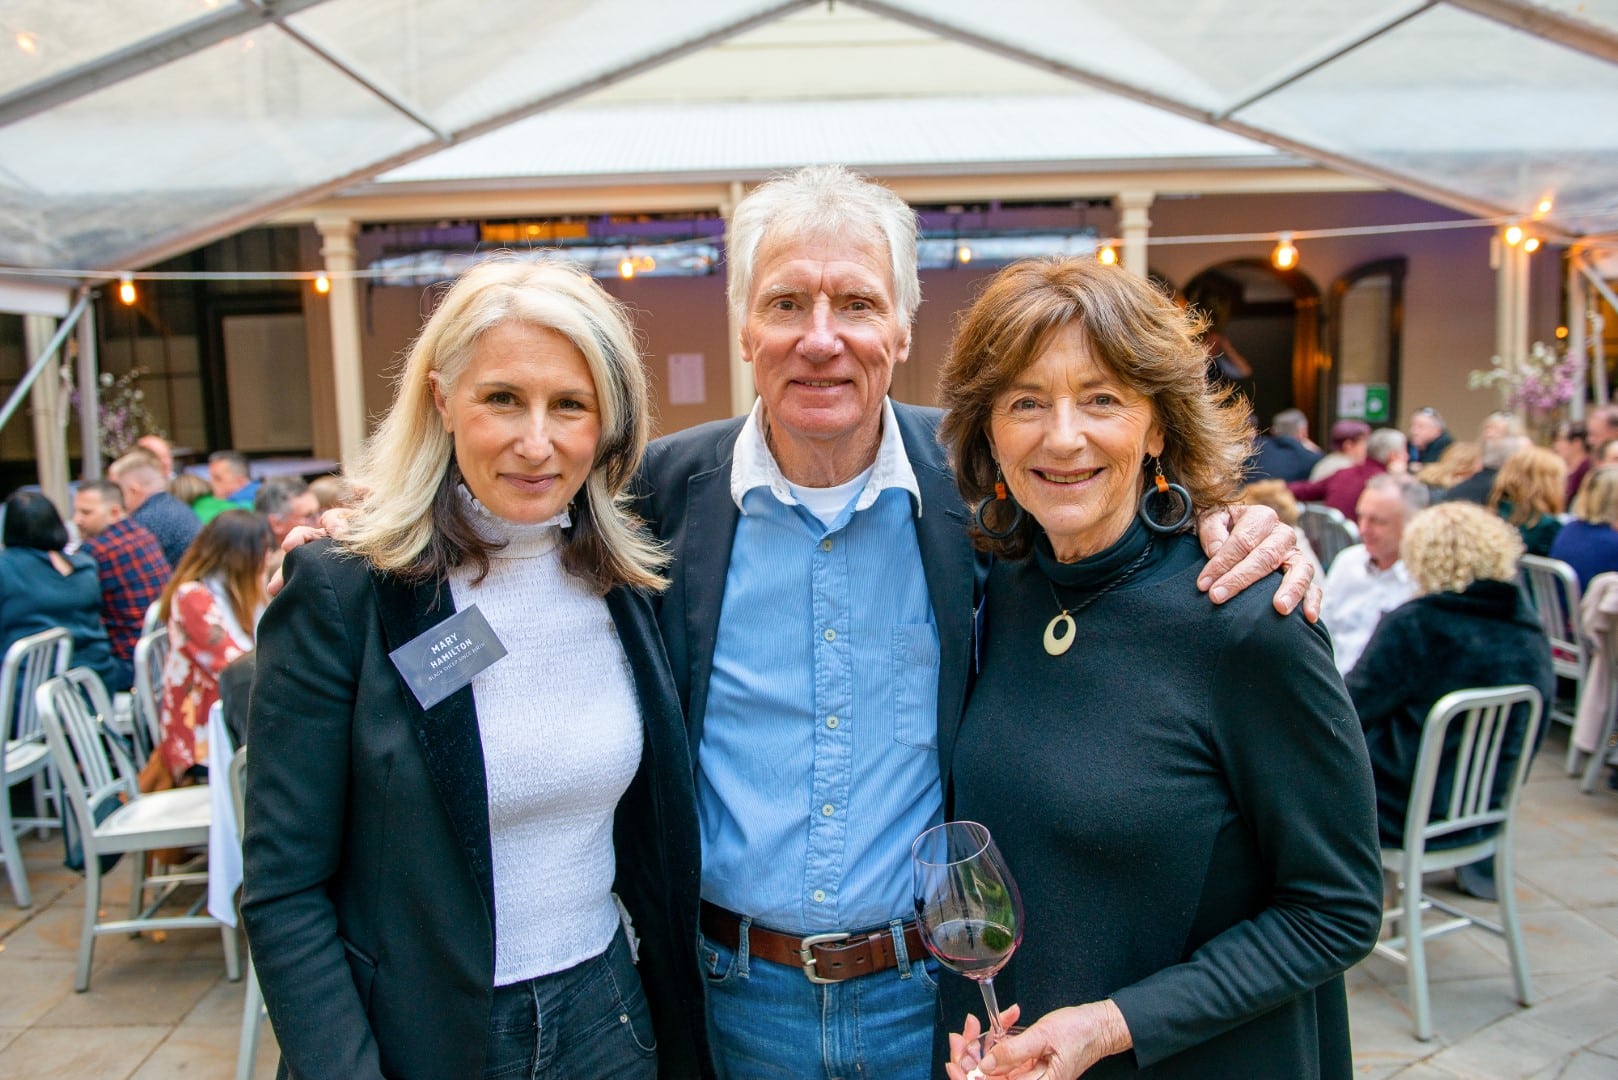 Mary Hamilton and her parents smiling at the camera at a Hugh Hamilton Wines event